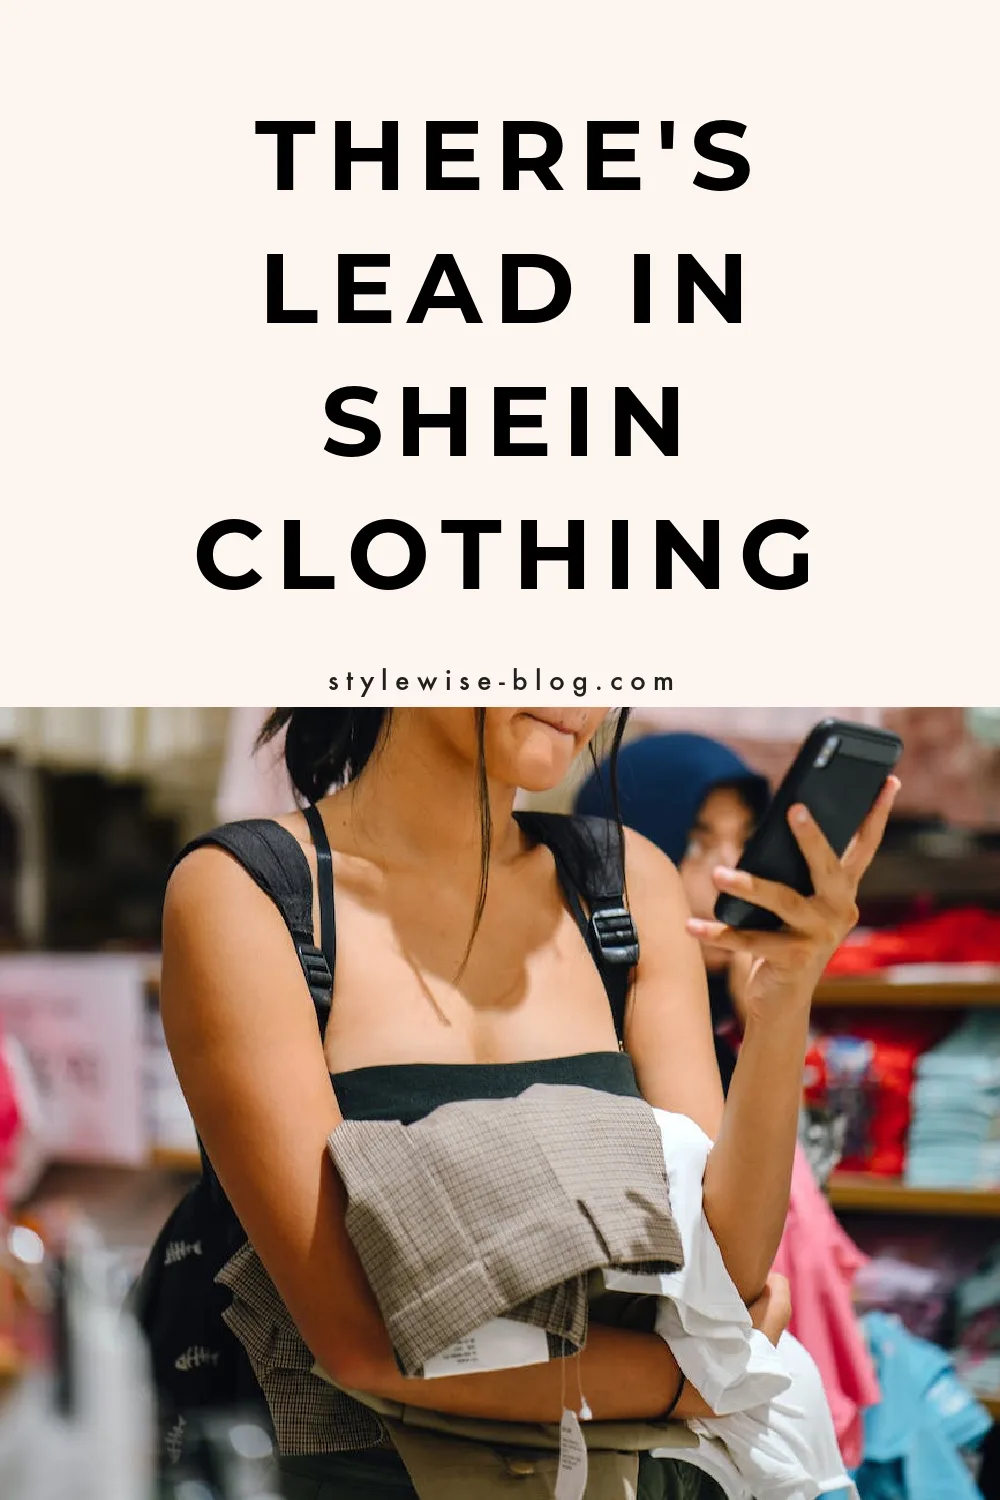 pinterest graphic: upper half is pink with text overlay that reads "There's lead in Shein clothing." Bottom half shows young person holding phone with handful of clothing at store.